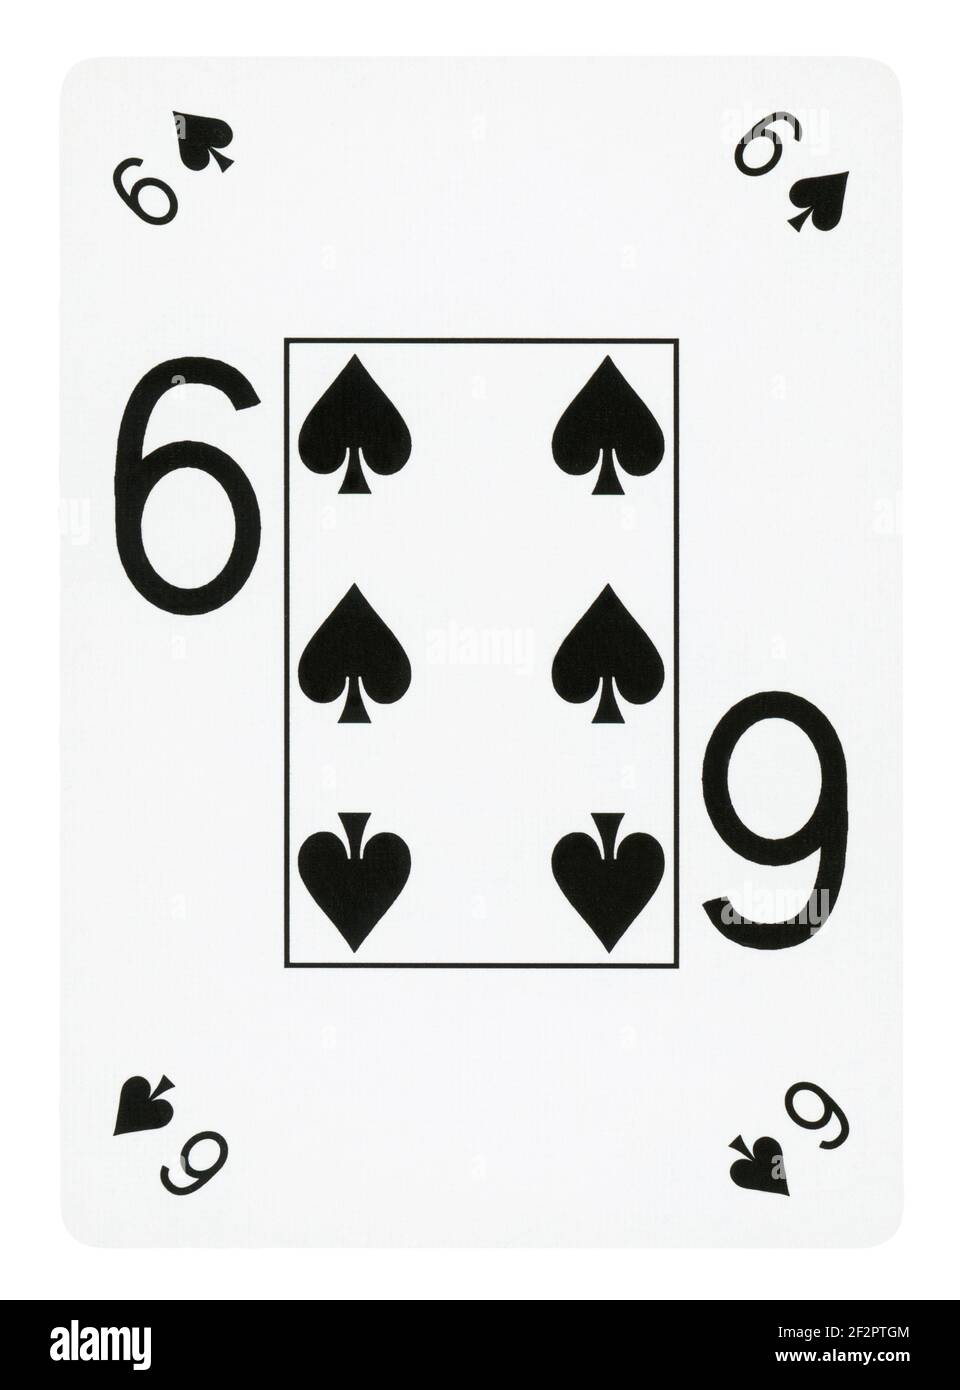 Six of Spades playing card - isolated on white (clipping path included) Stock Photo